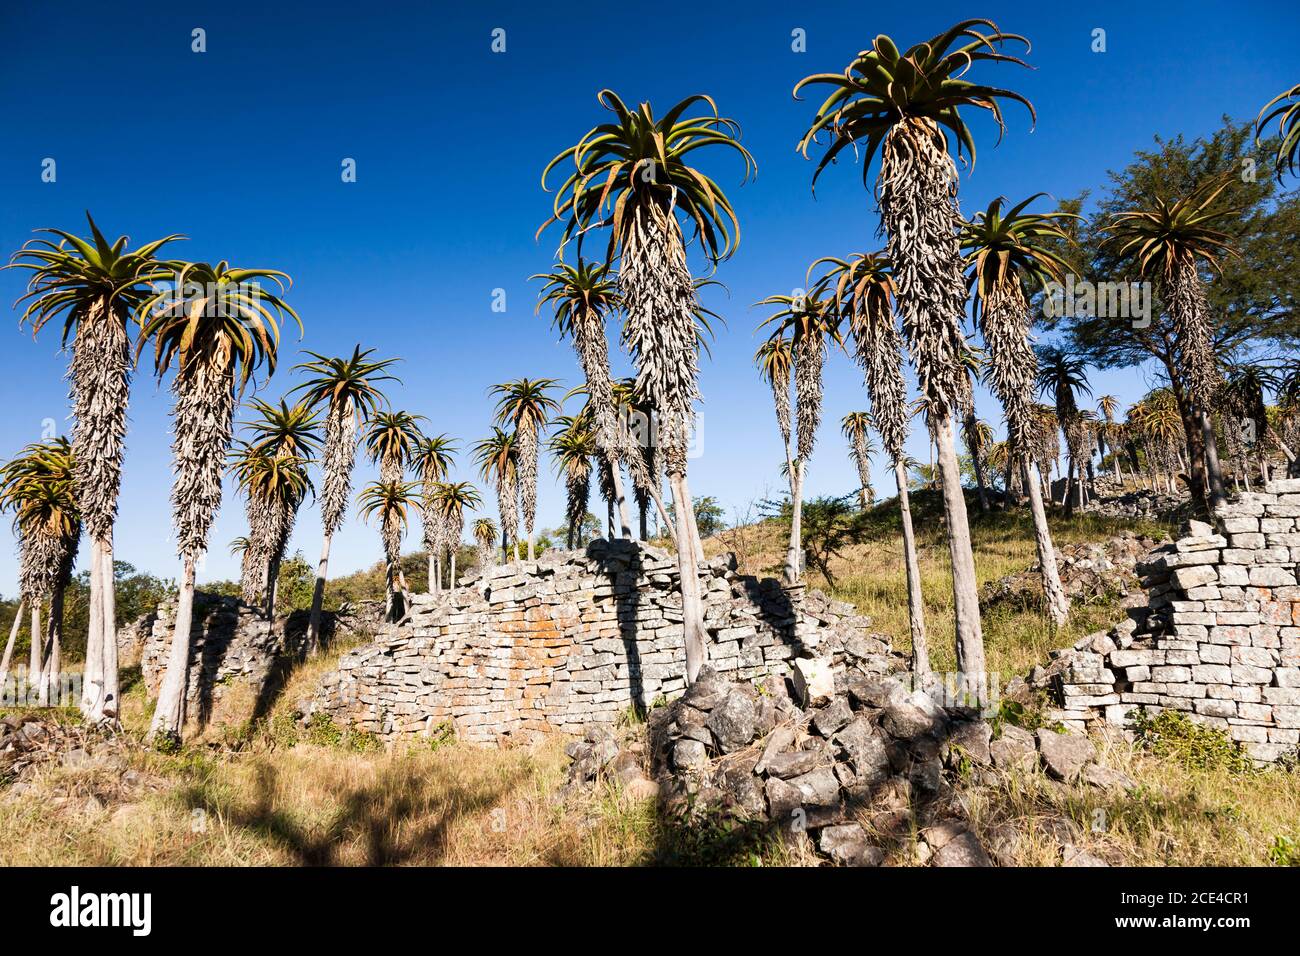 Great Zimbabwe ruins, stone structures of  'The Valley Complex' and aloes, ancient capital of Bantu civilization, Masvingo Province, Zimbabwe, Africa Stock Photo